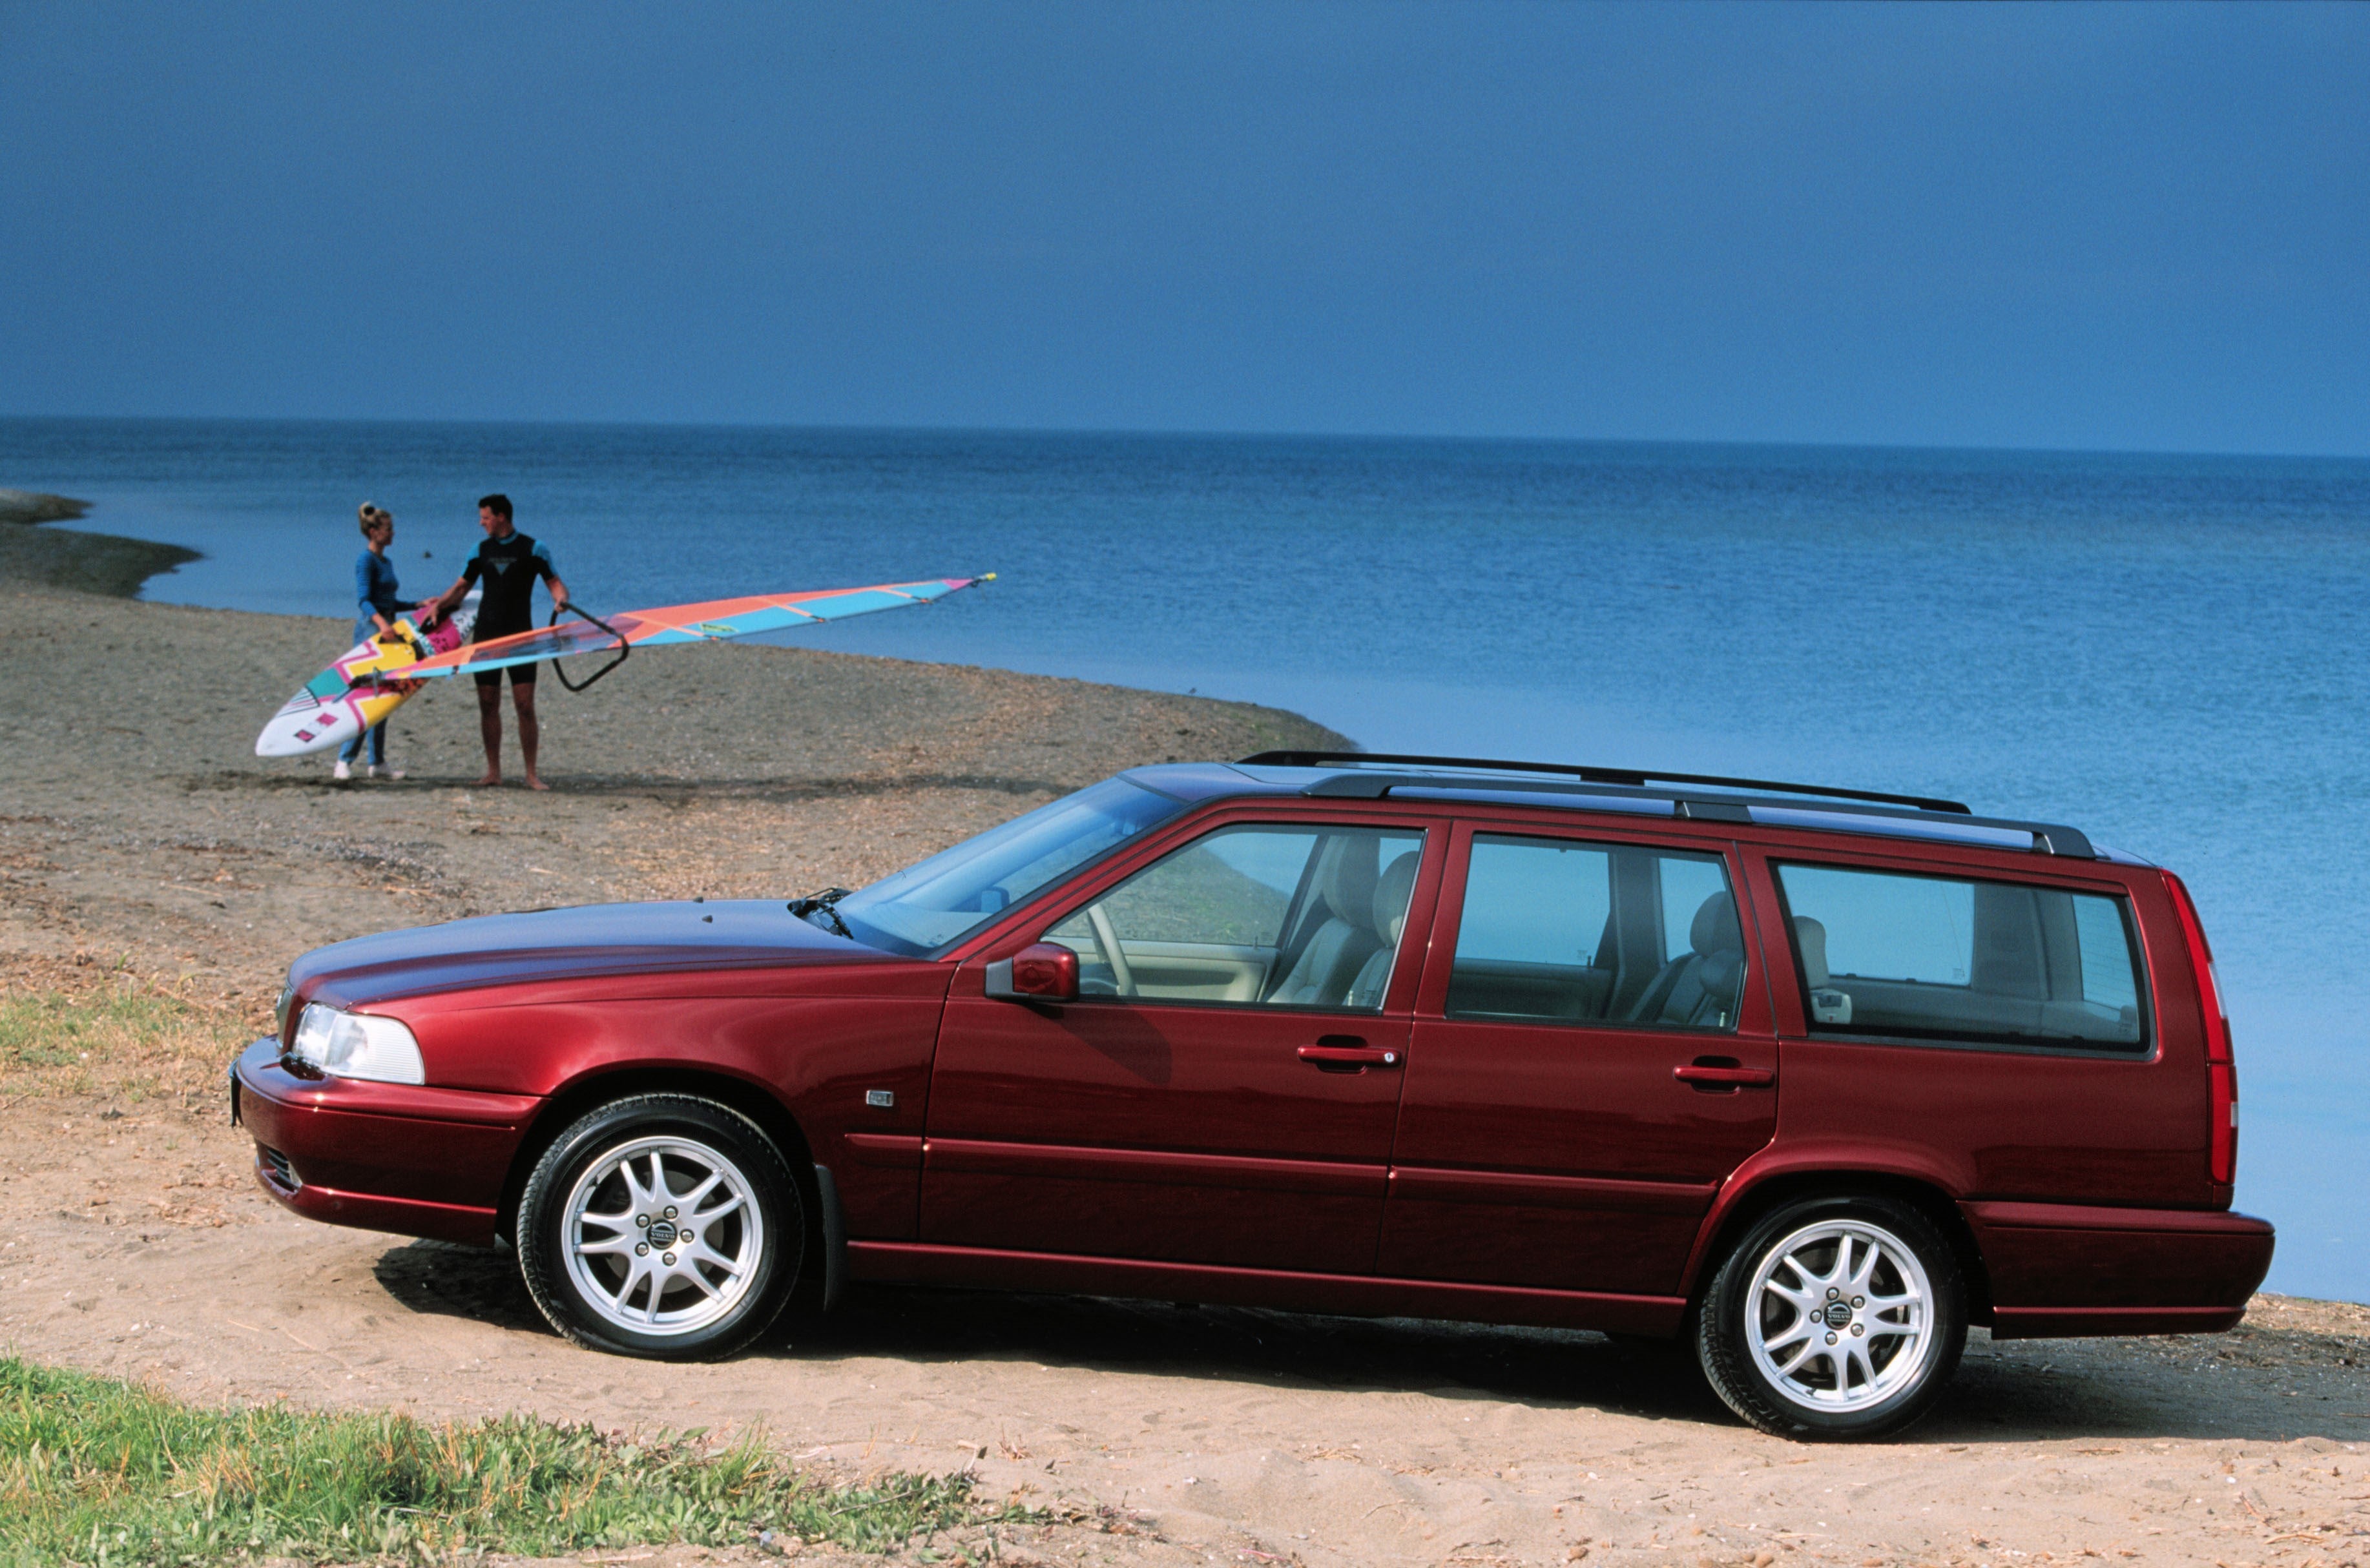 The classic Volvo 70-series was manufactured from 1996 to 2016